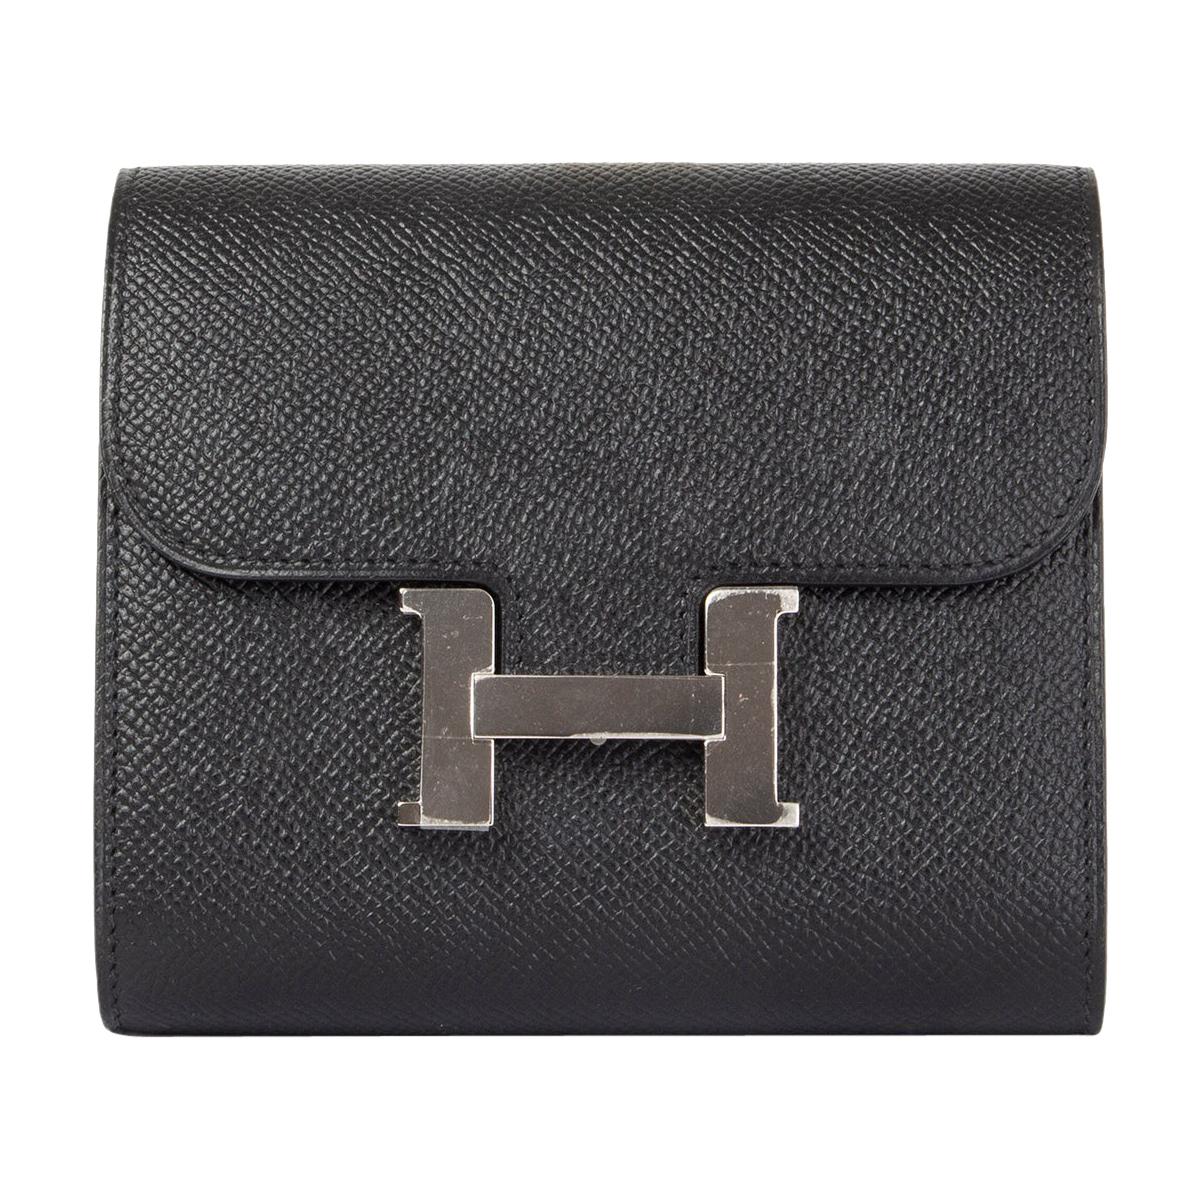 HERMES black Epsom leather CONSTANCE COMPACT Wallet